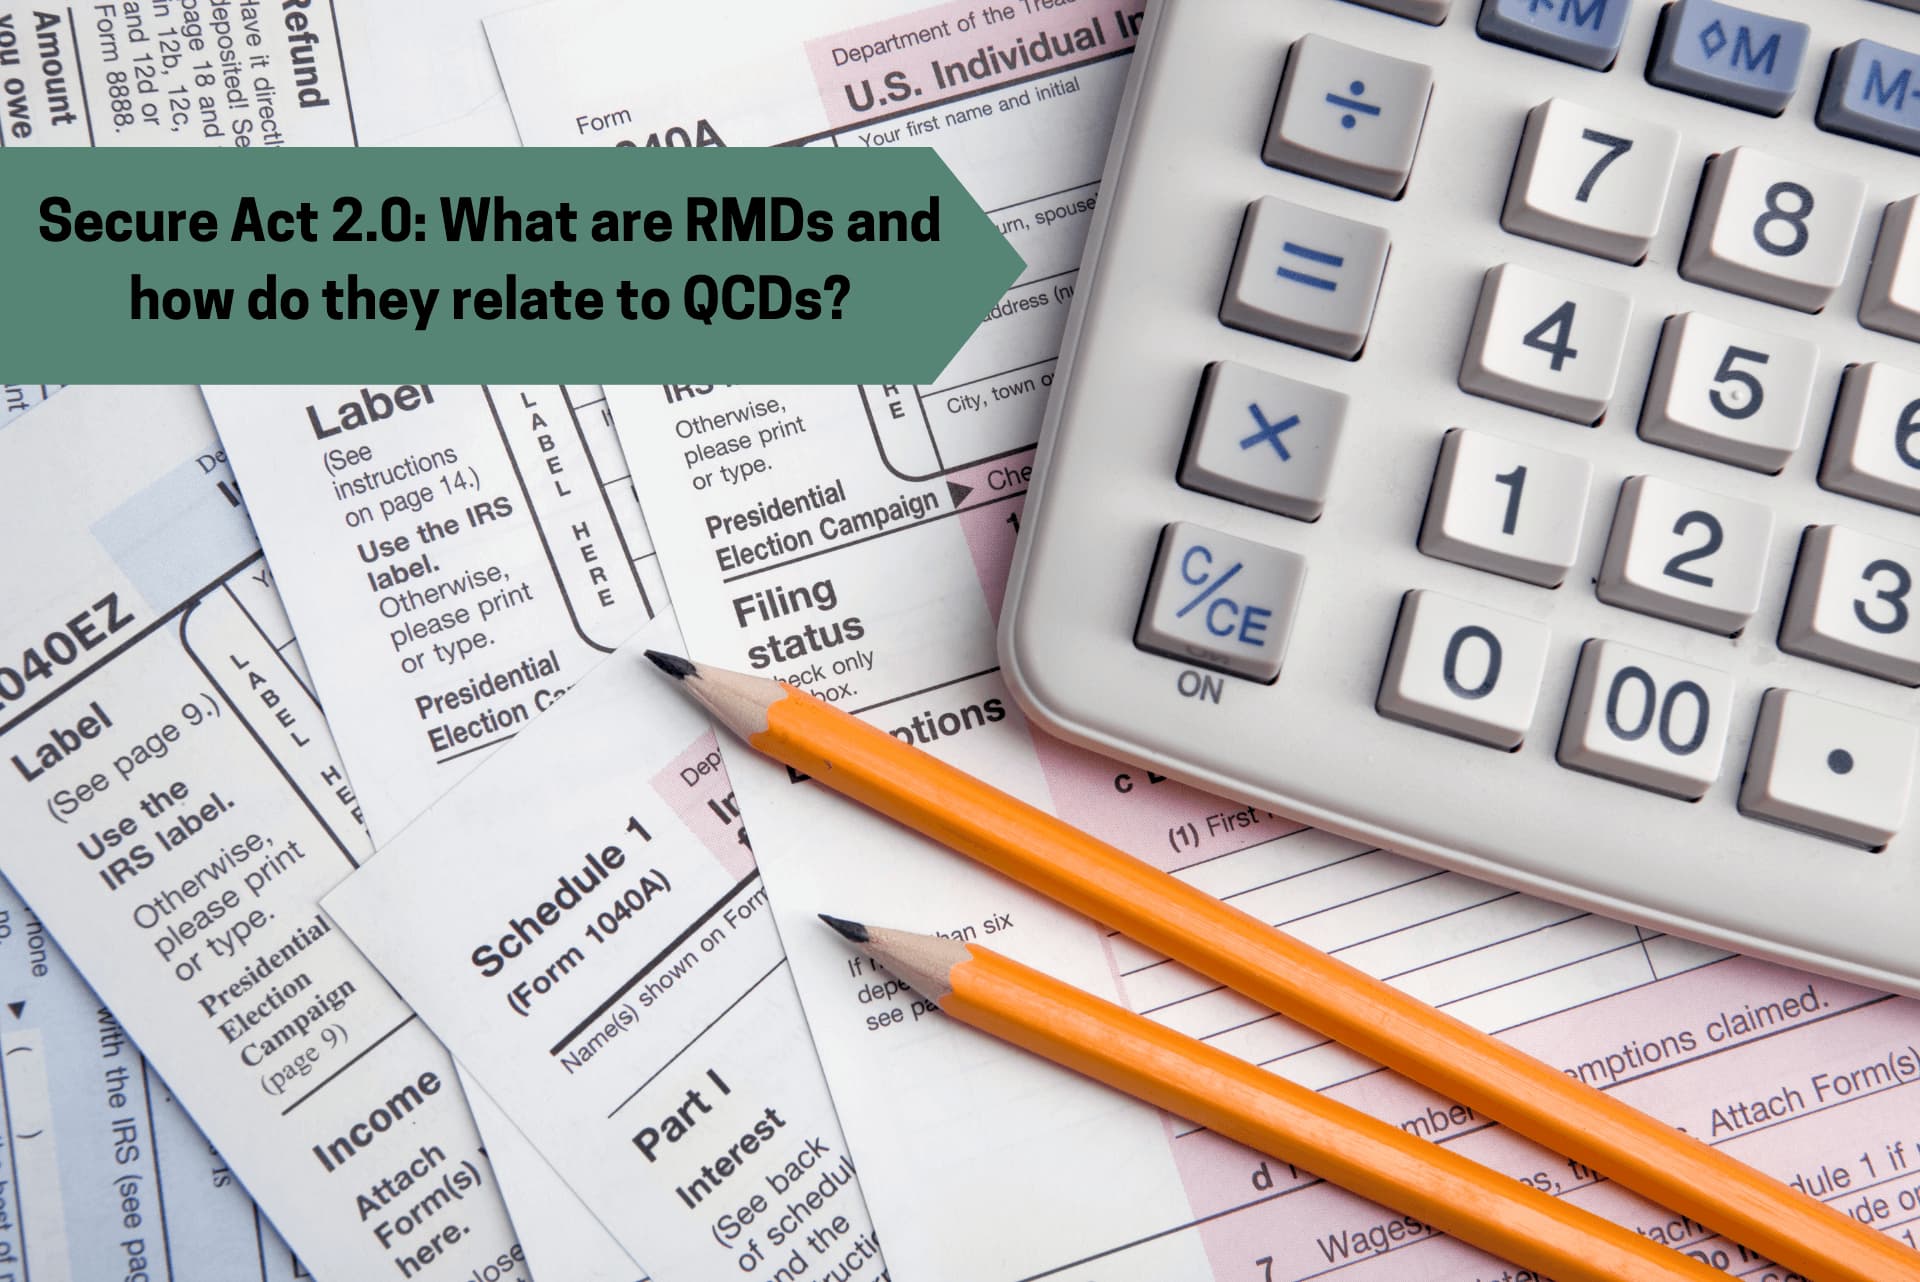 SECURE Act 2.0: What are RMDs and how do they relate to QCDs?